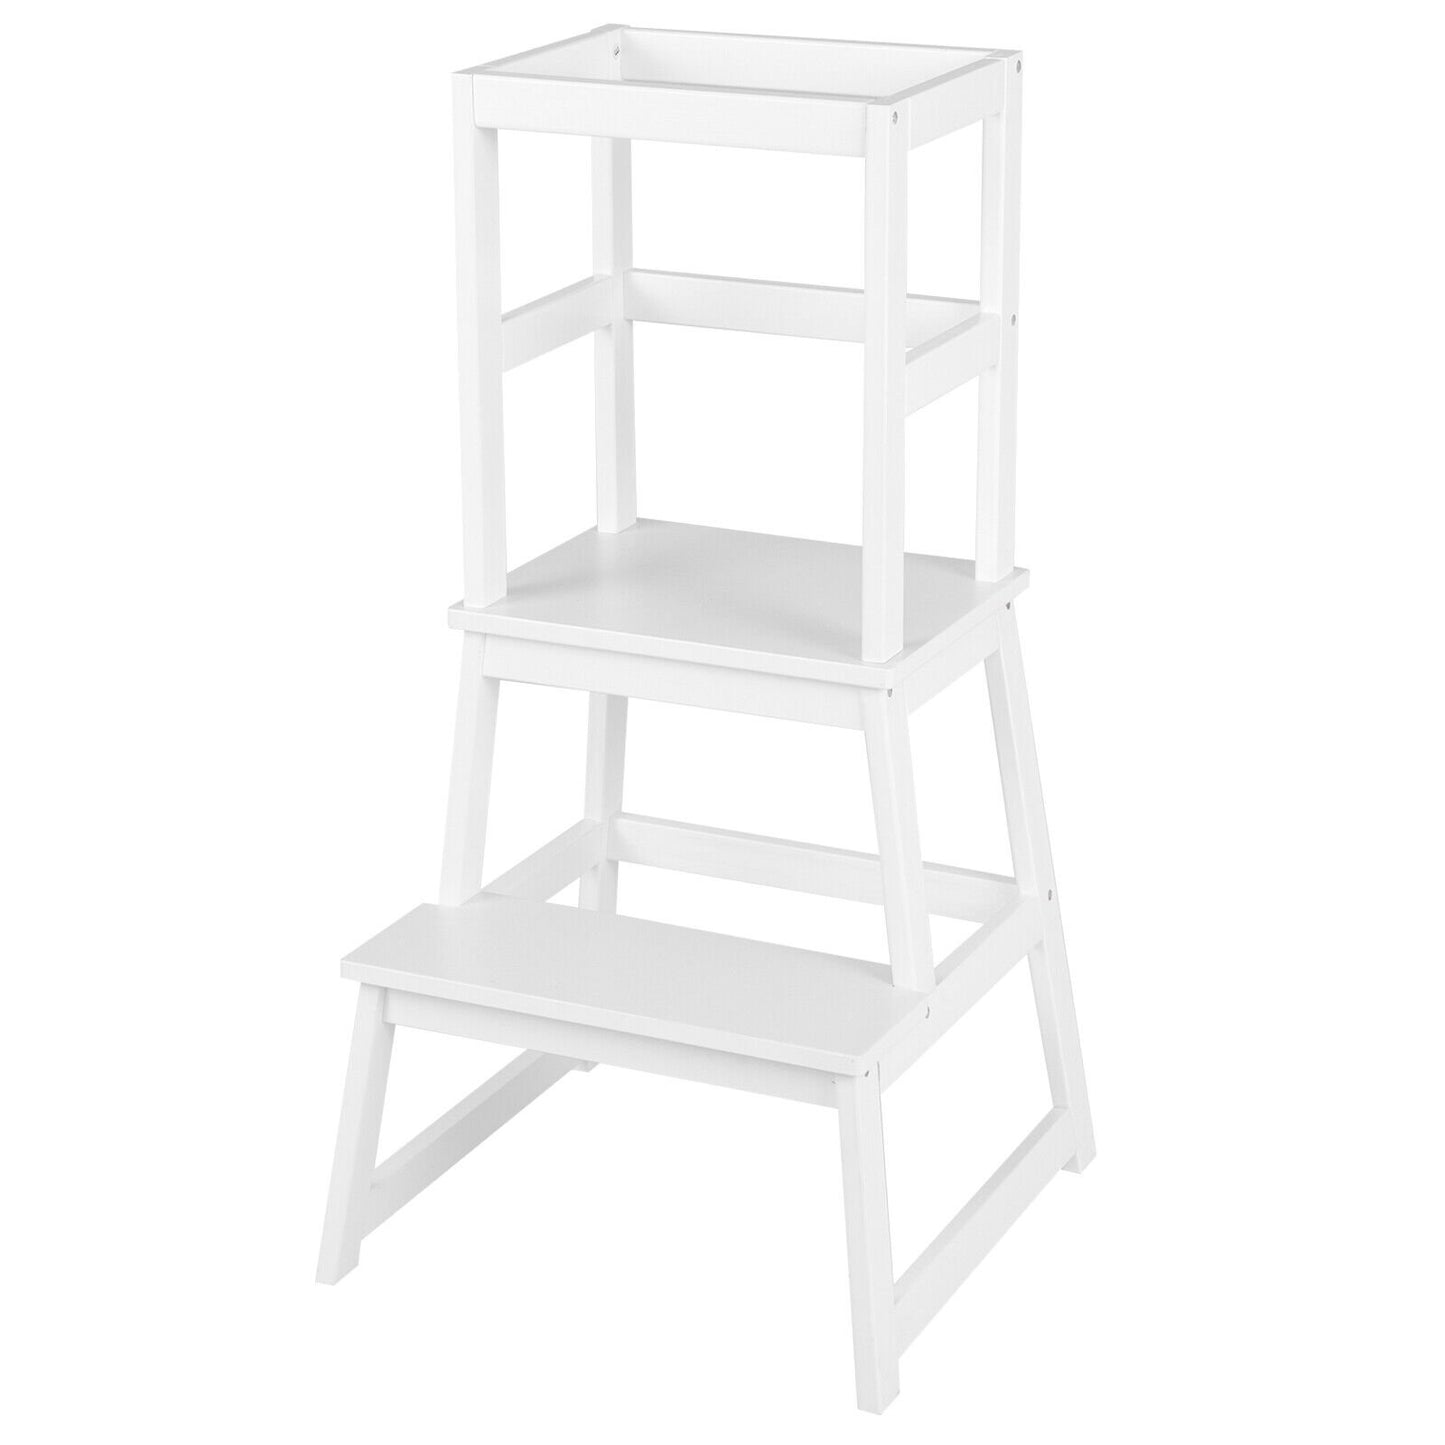 2-in-1 Multifunctional Toddler Step Stool with Safety Rail, White